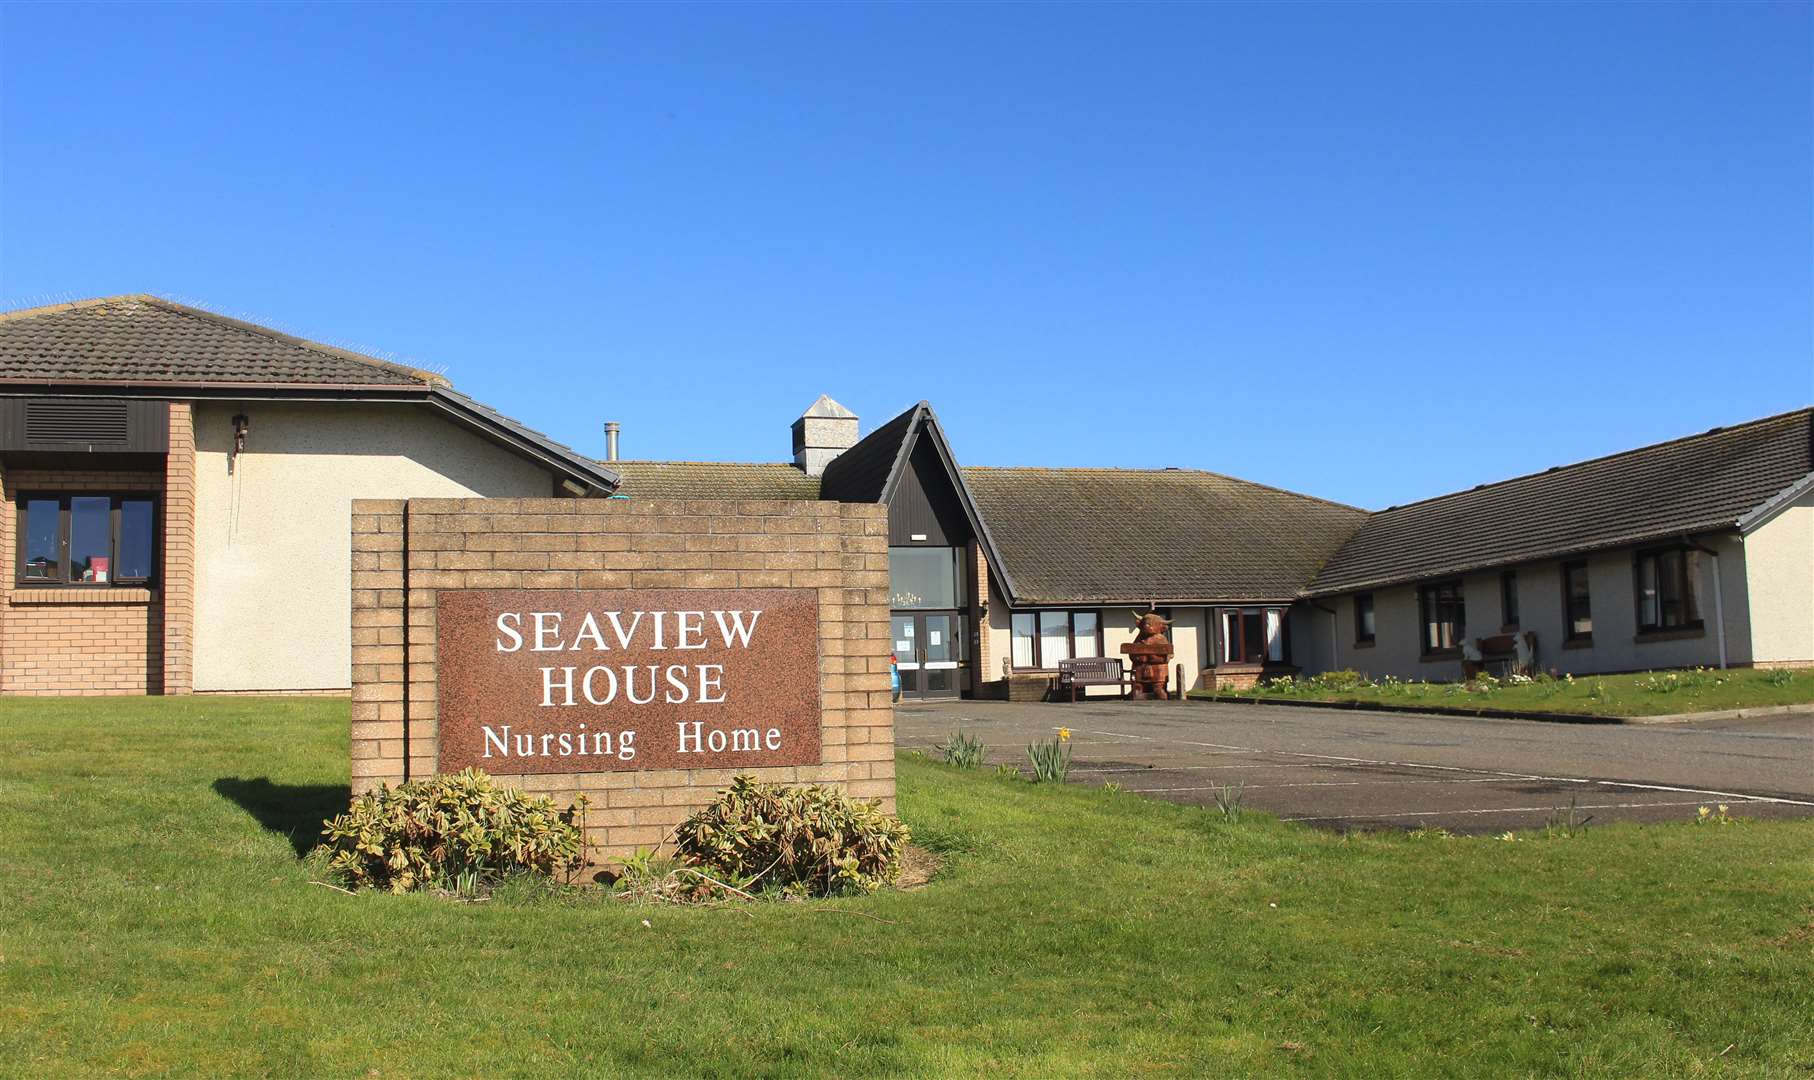 Seaview House care home will host the monthly dementia café in its main lounge.